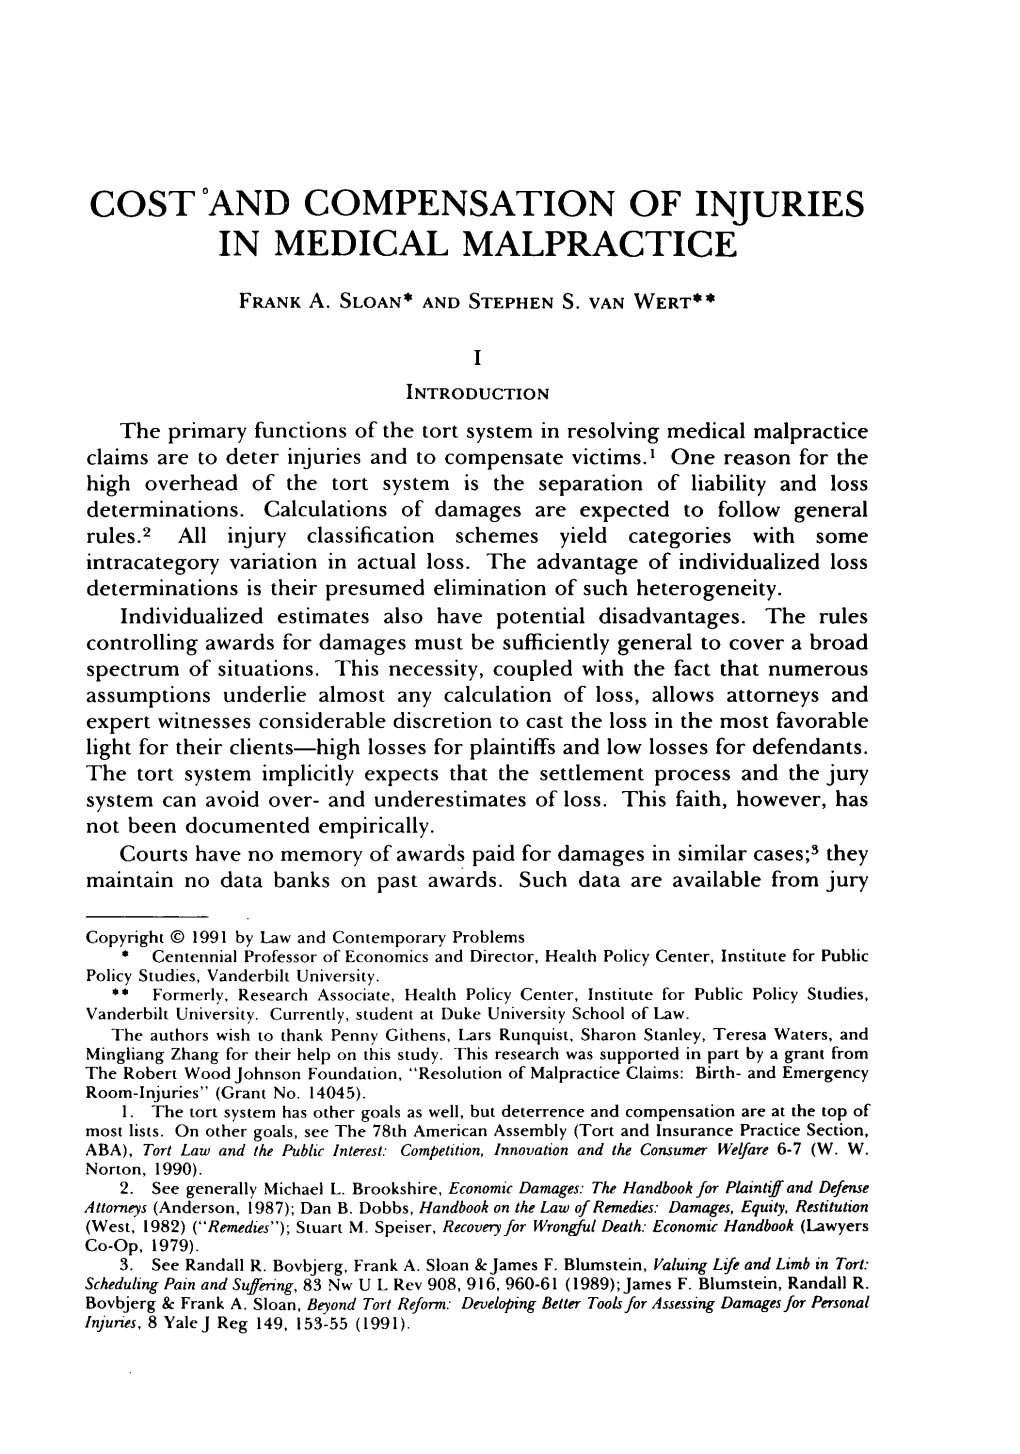 Cost and Compensation of Injuries in Medical Malpractice